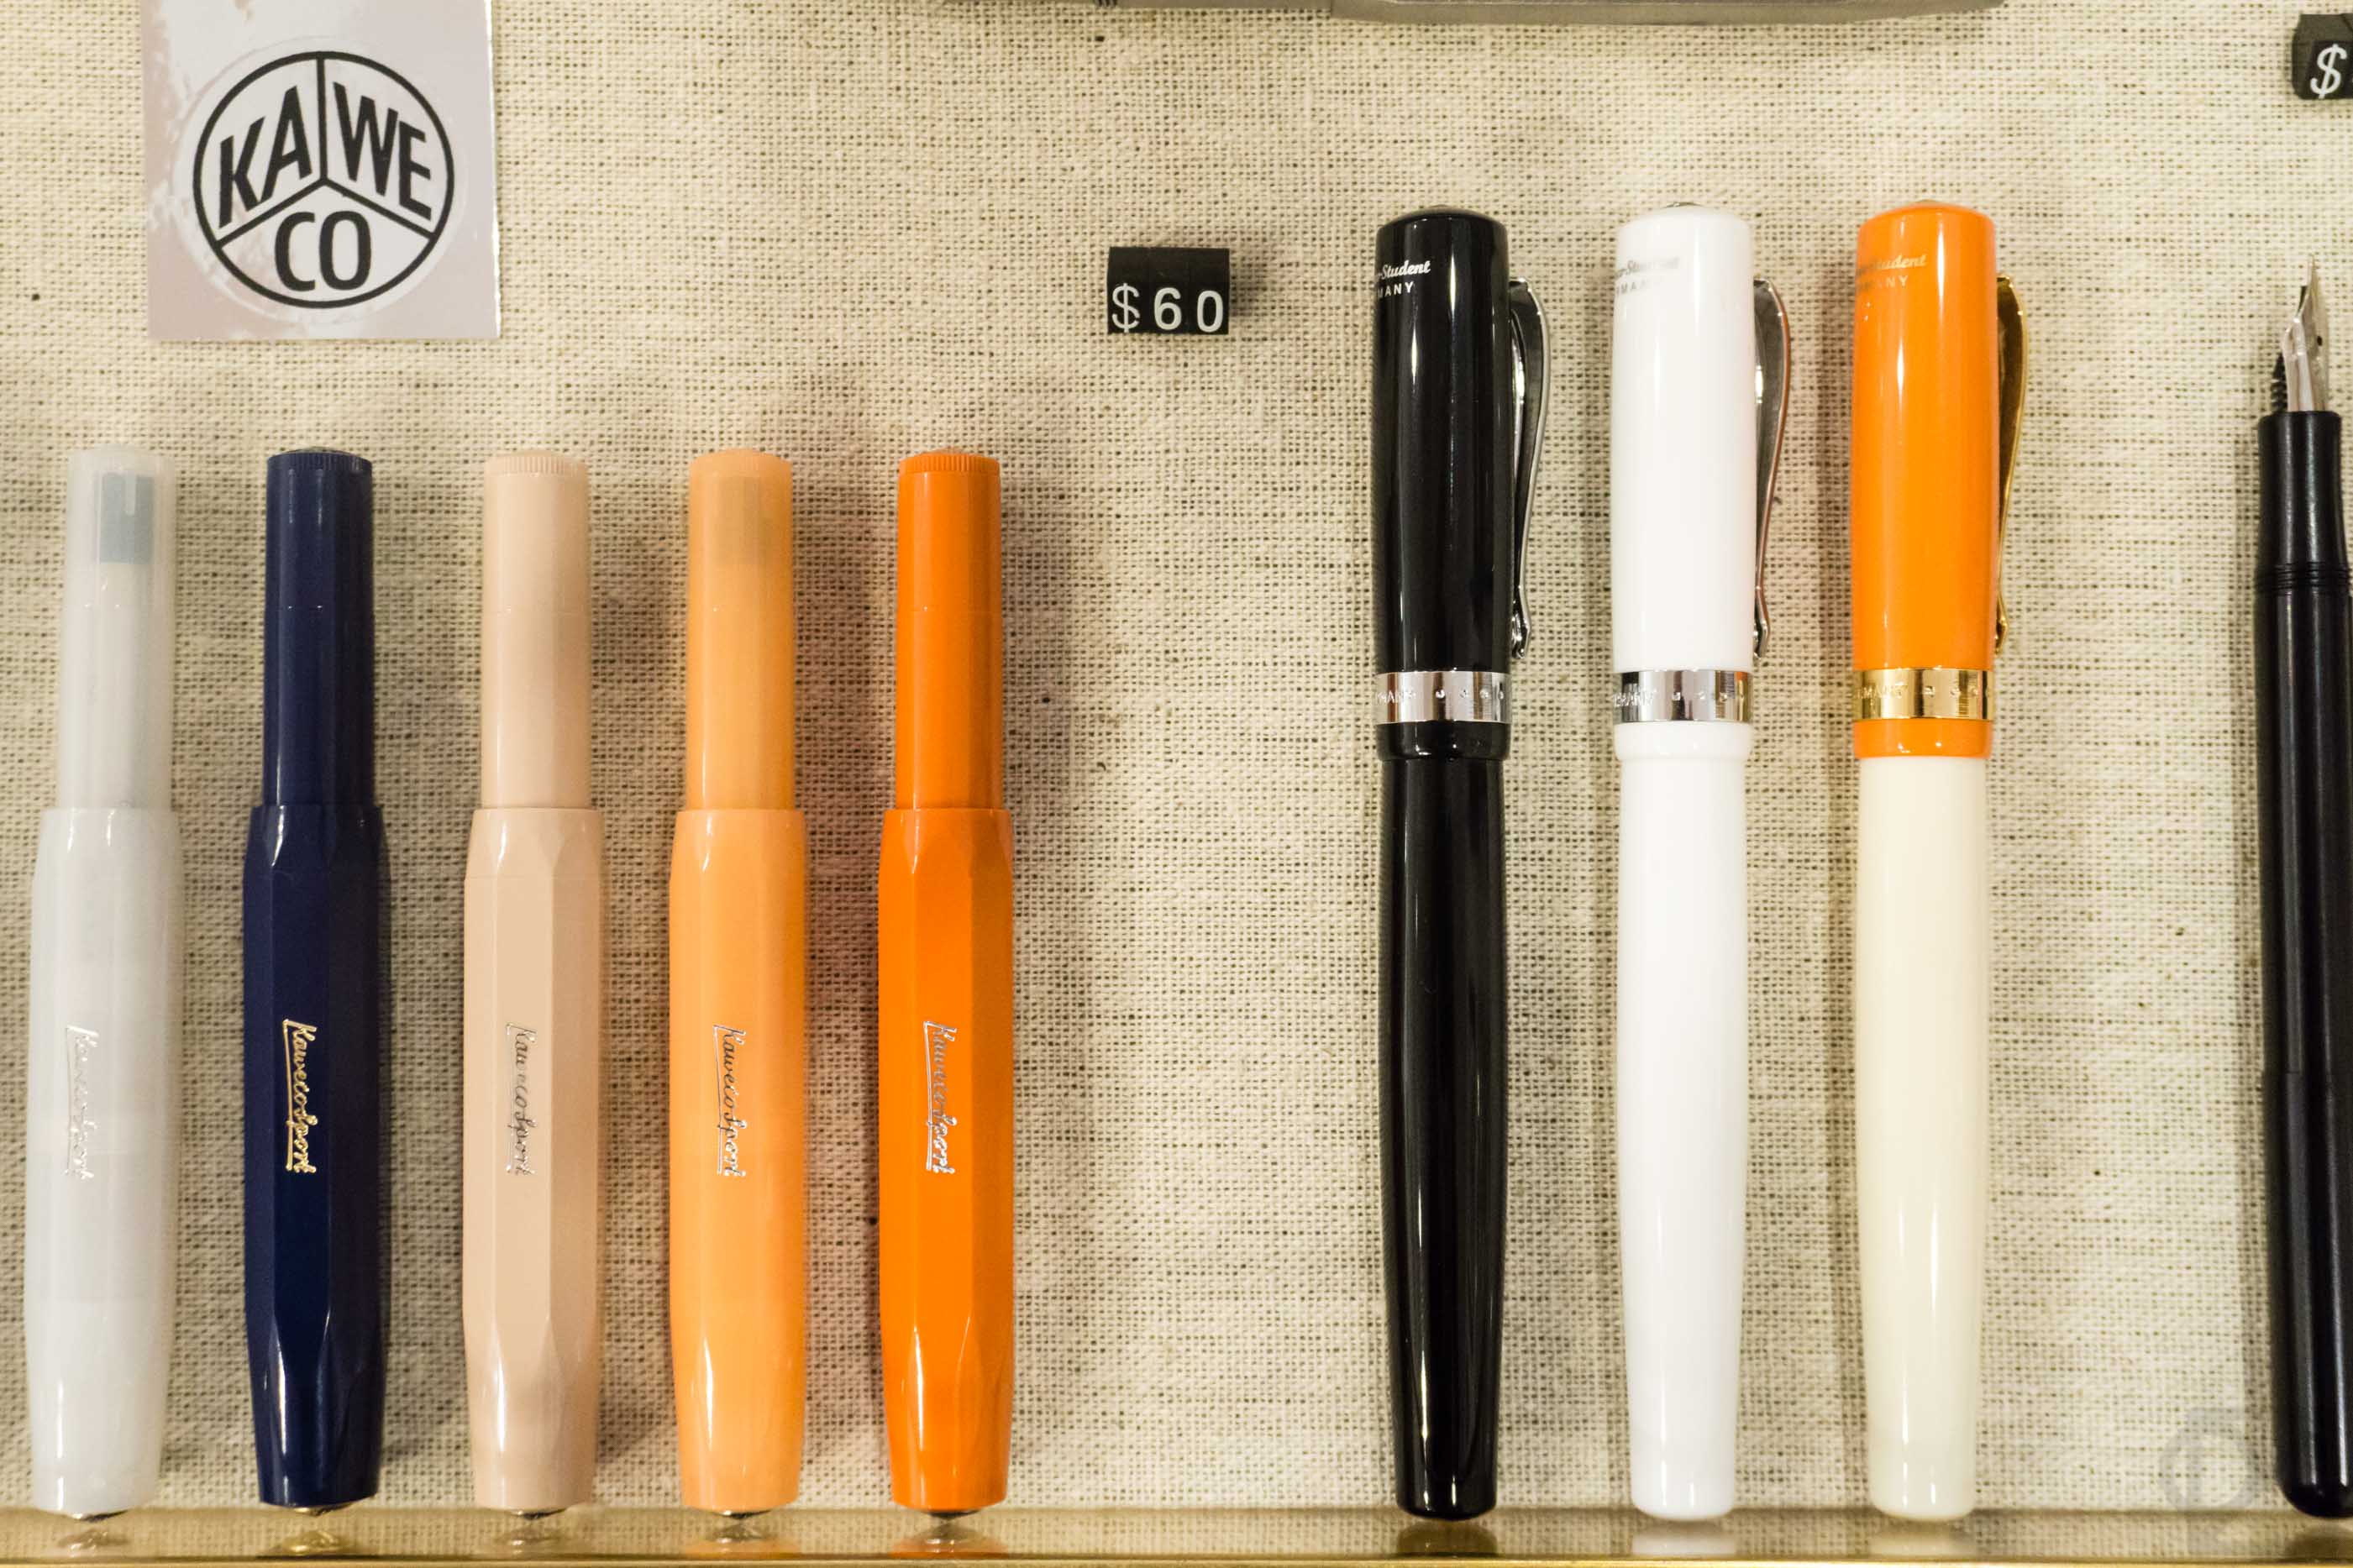 New additions to our Kaweco fountain pen selection.